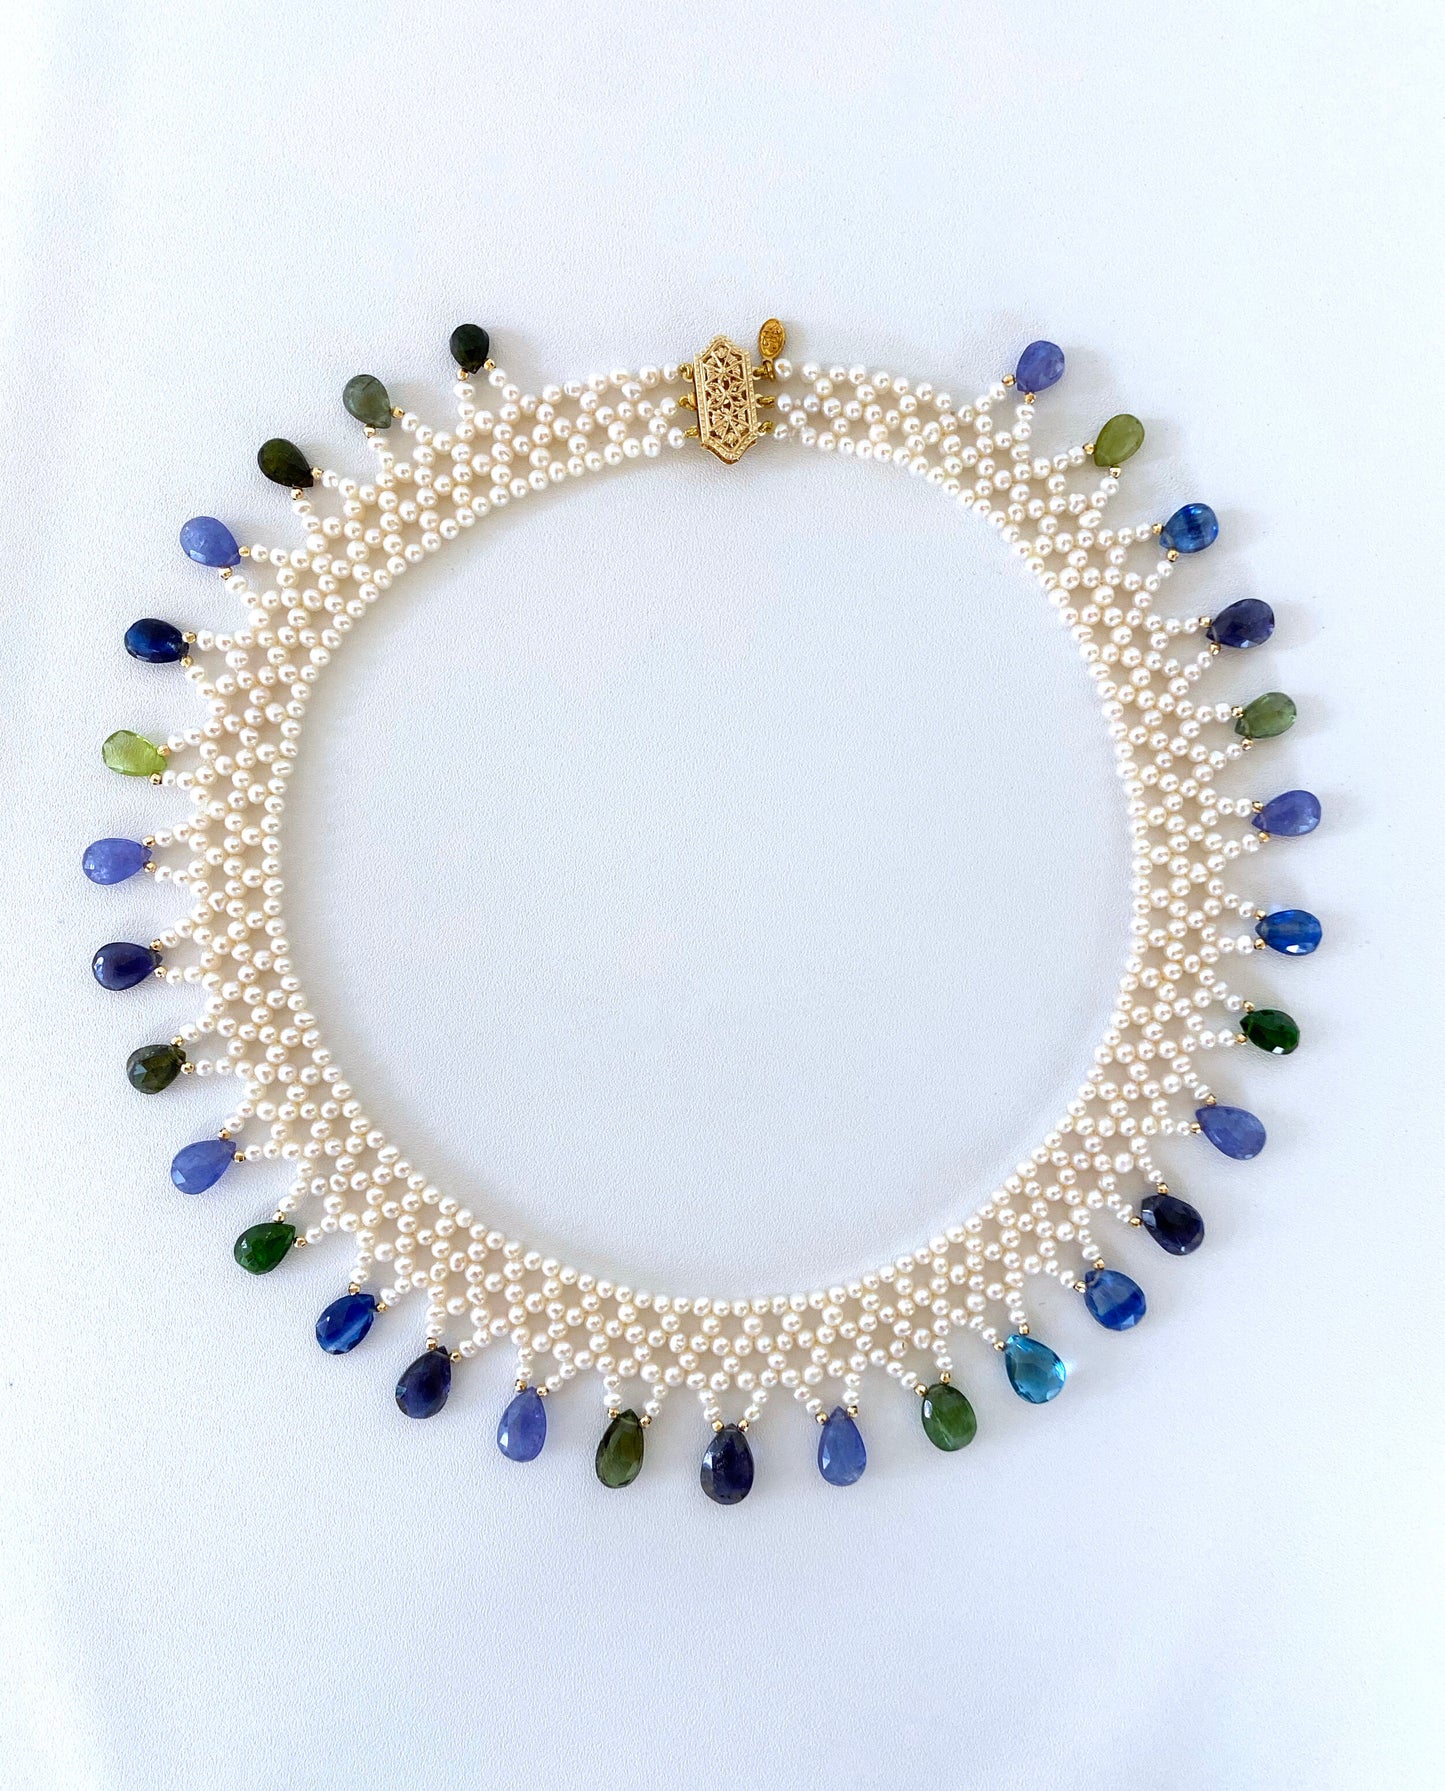 Hand Woven Multi Jewel and Pearl Necklace with 14K Yellow Gold